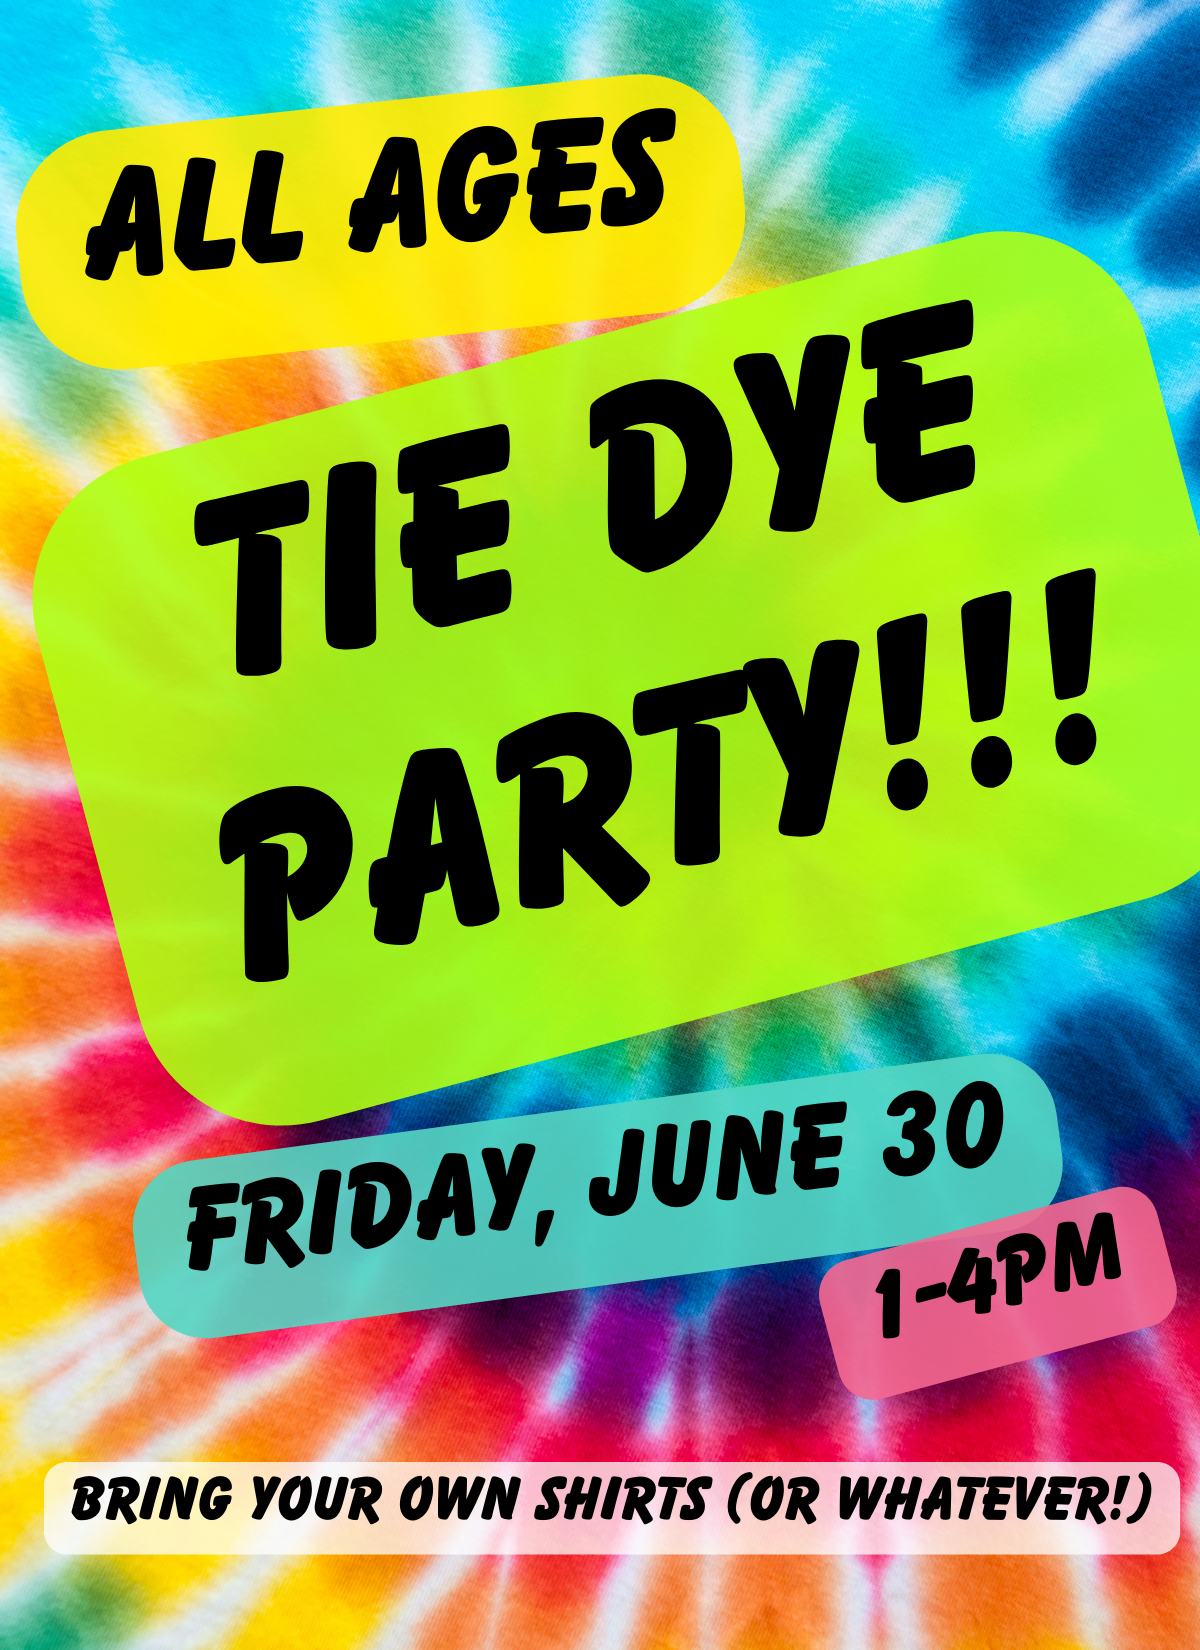 All ages Tie Dye Party Friday June 30